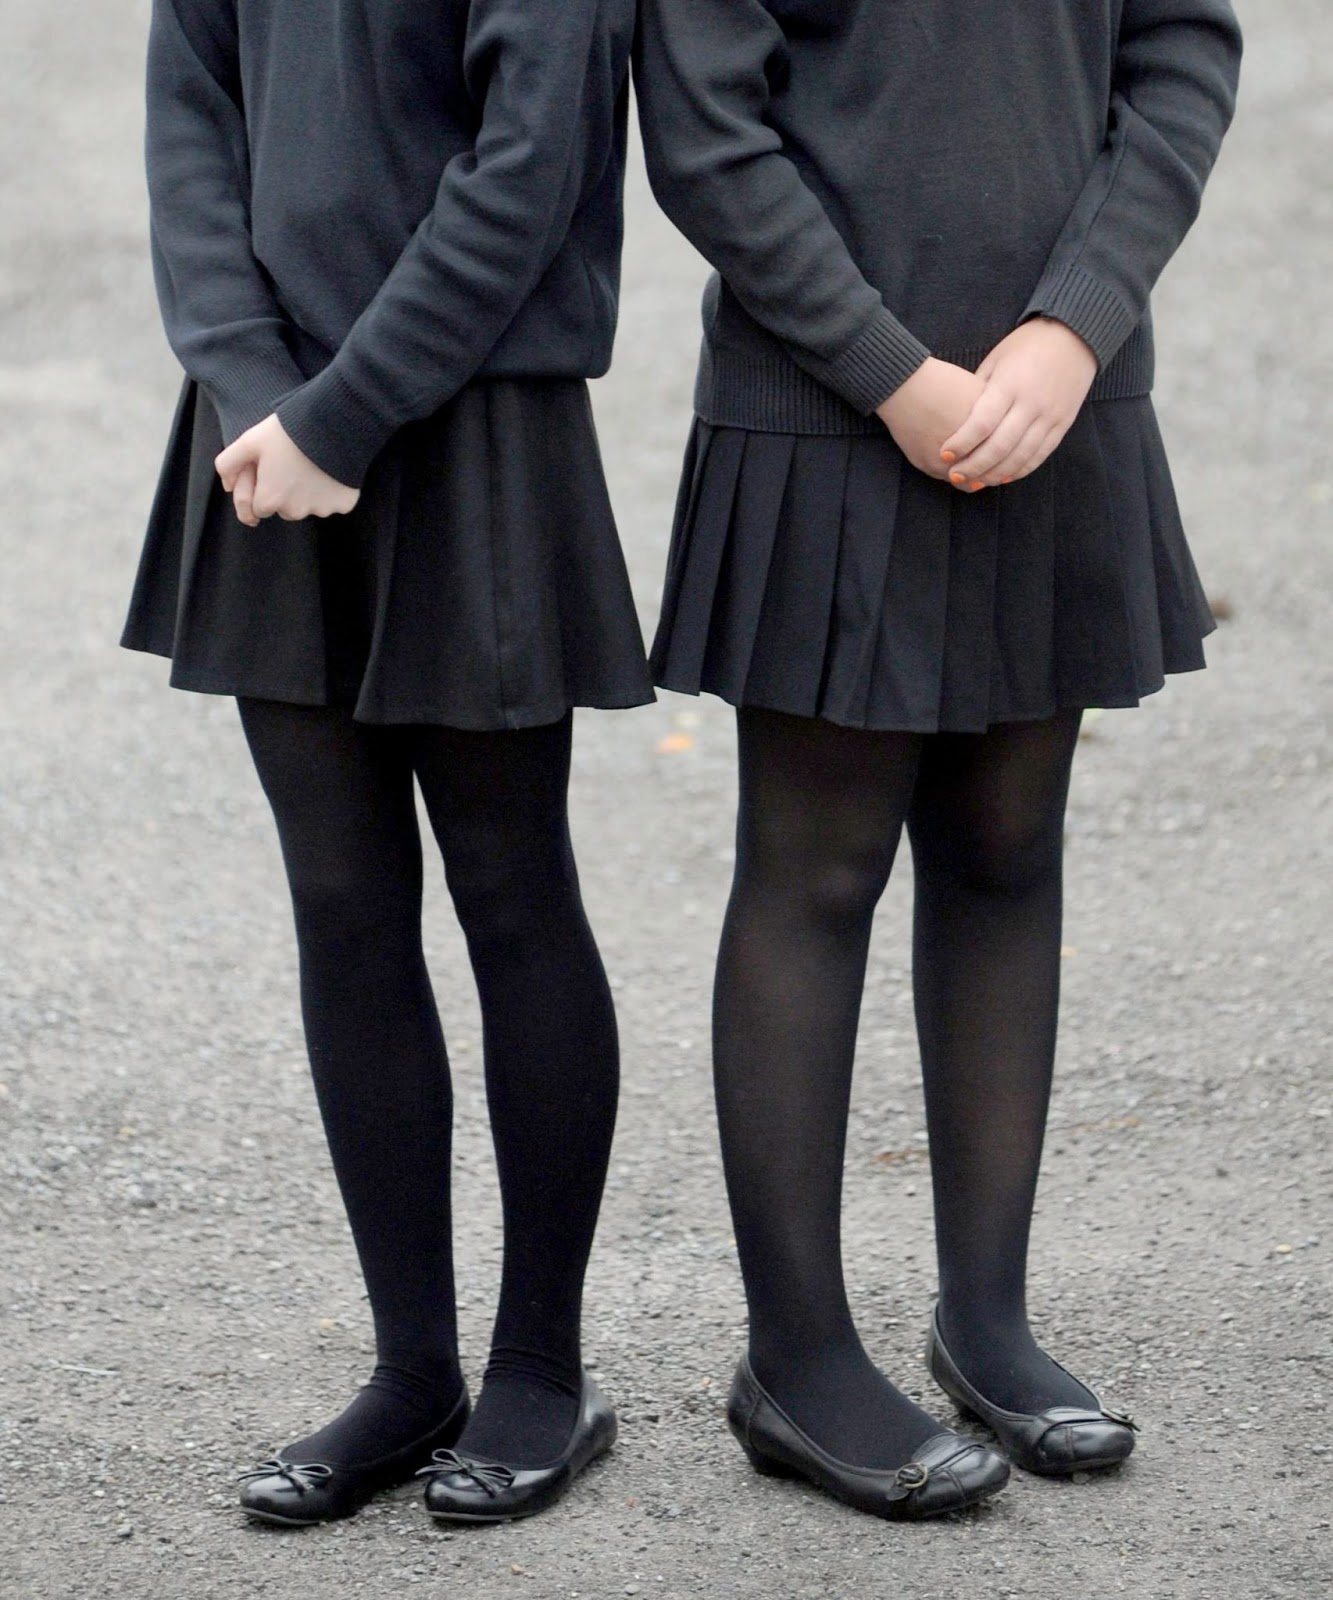 School insists girls wear tights - Fashionmylegs : The tights and ...